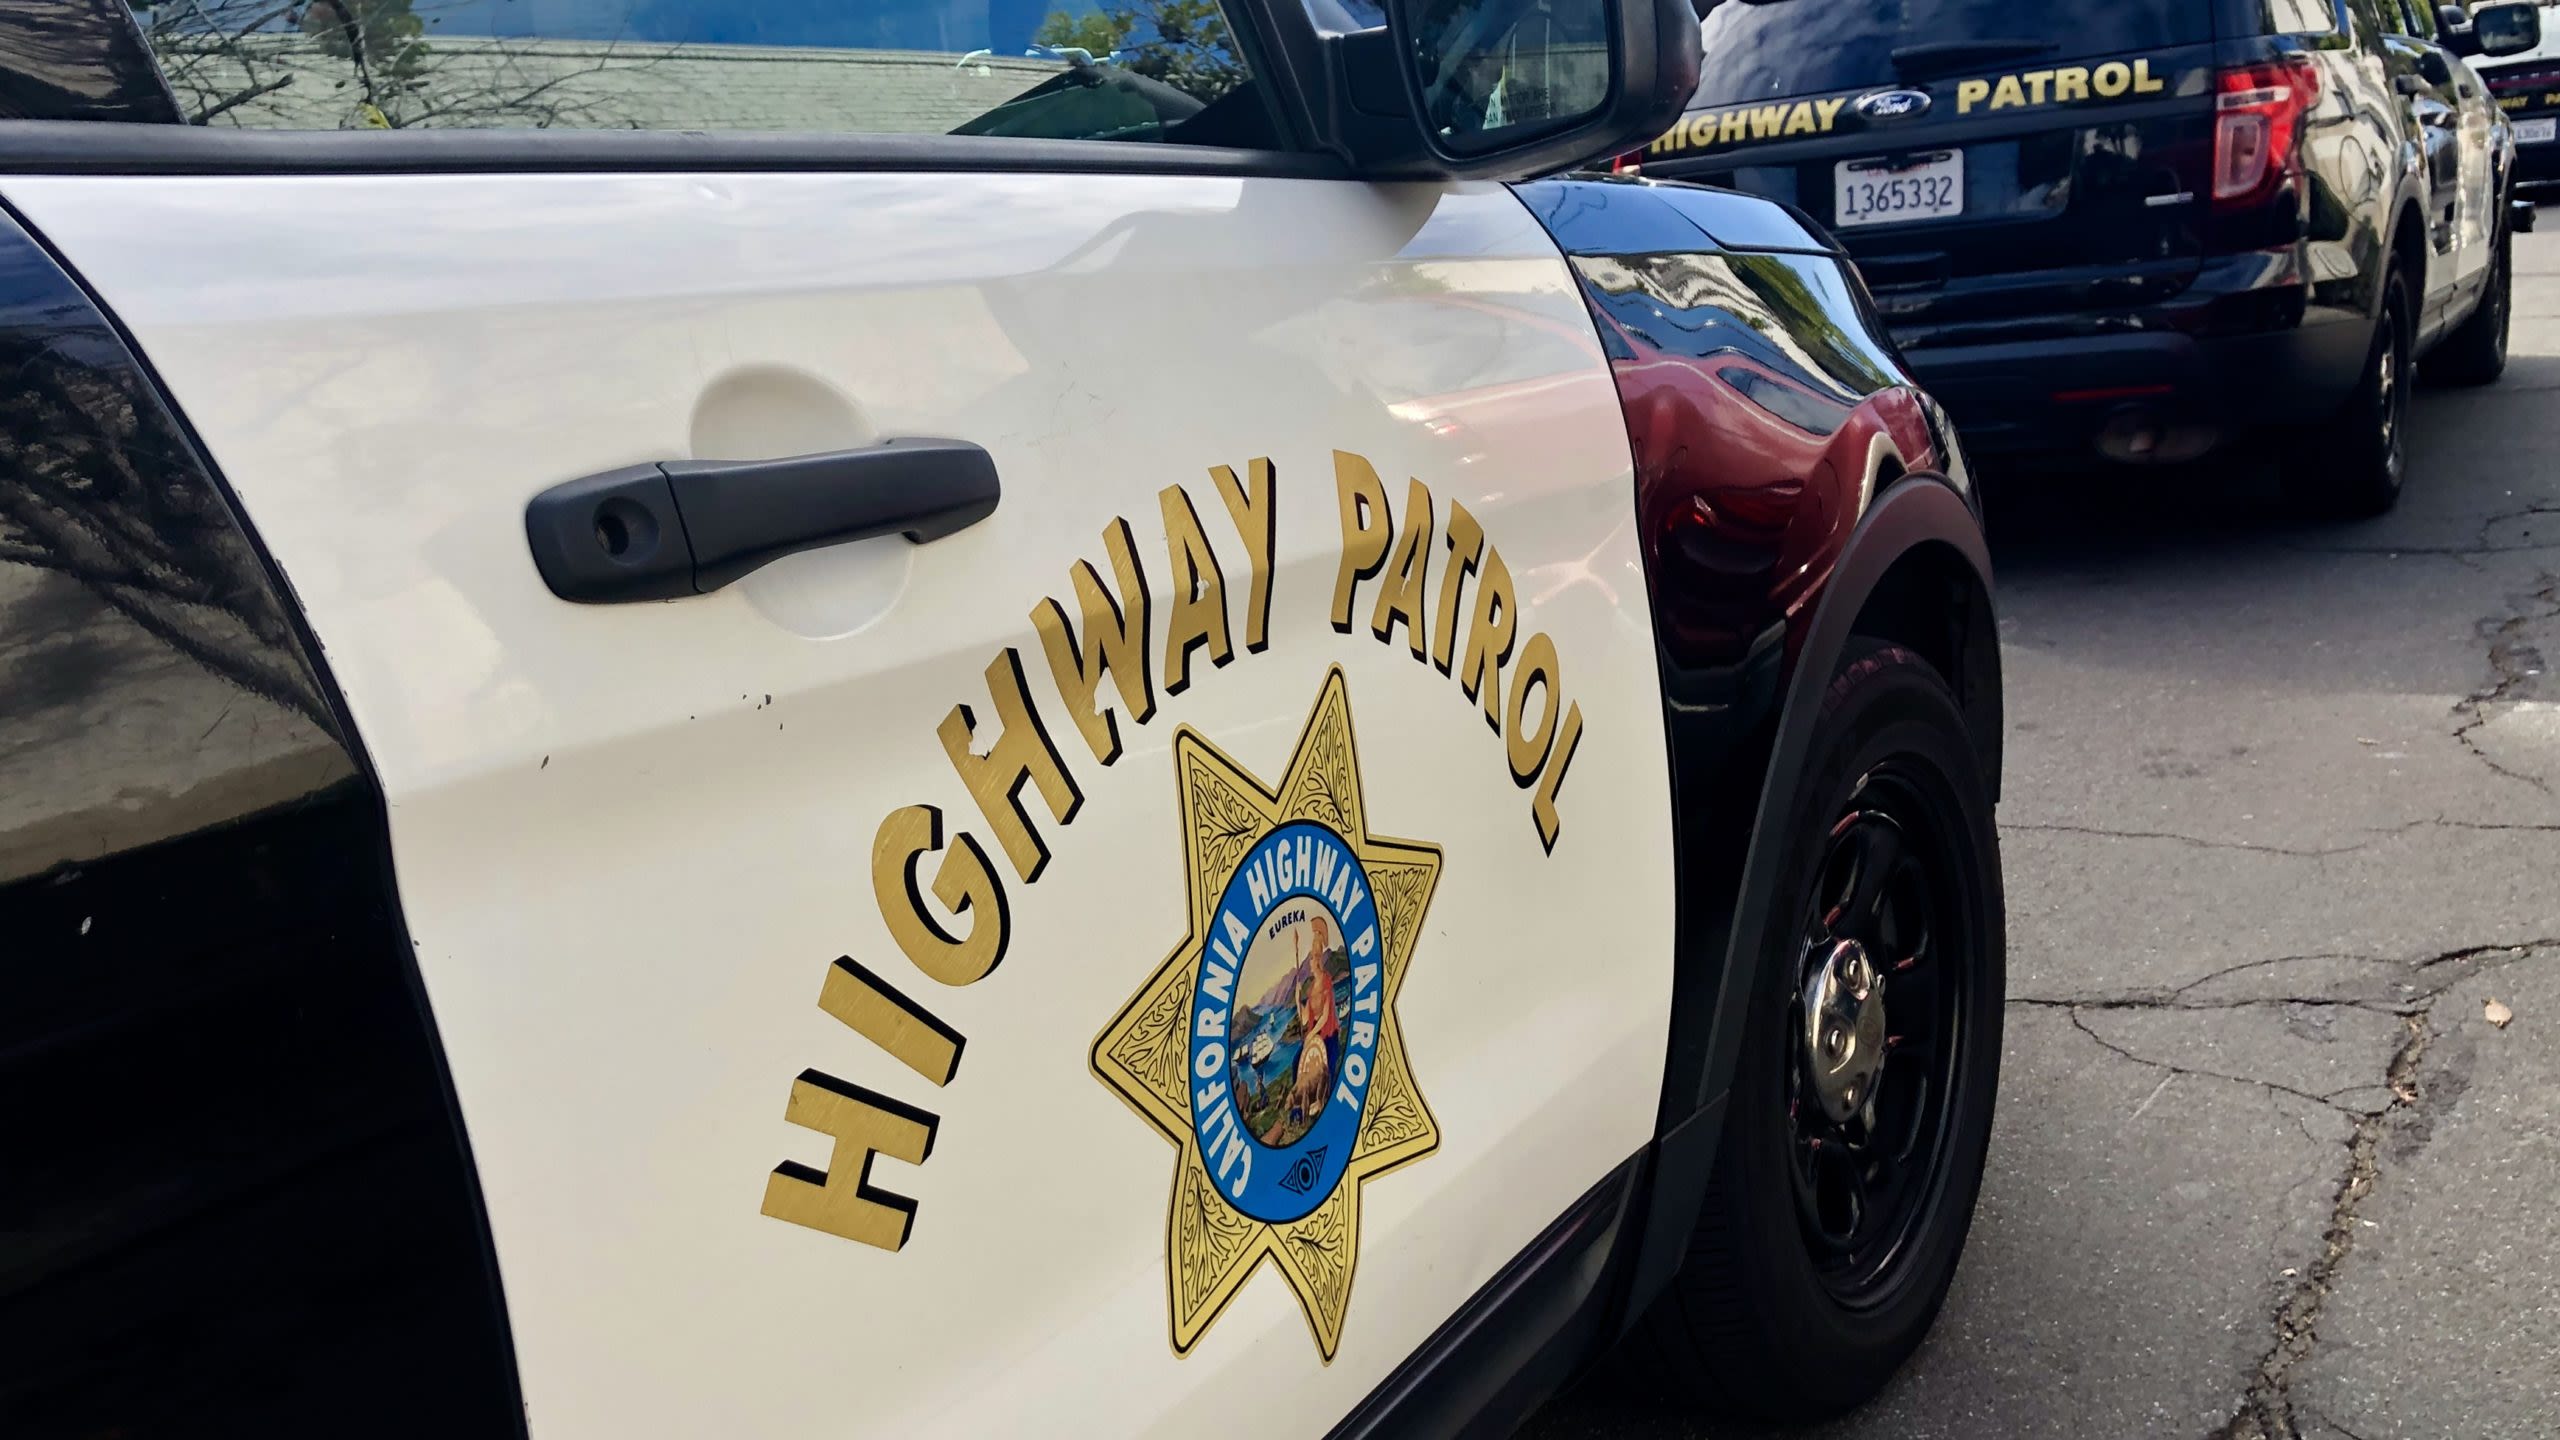 Monterey to San Luis Obispo County motorcycle chase ends 25-year-old man's arrest for driving 140 mph and evading officers